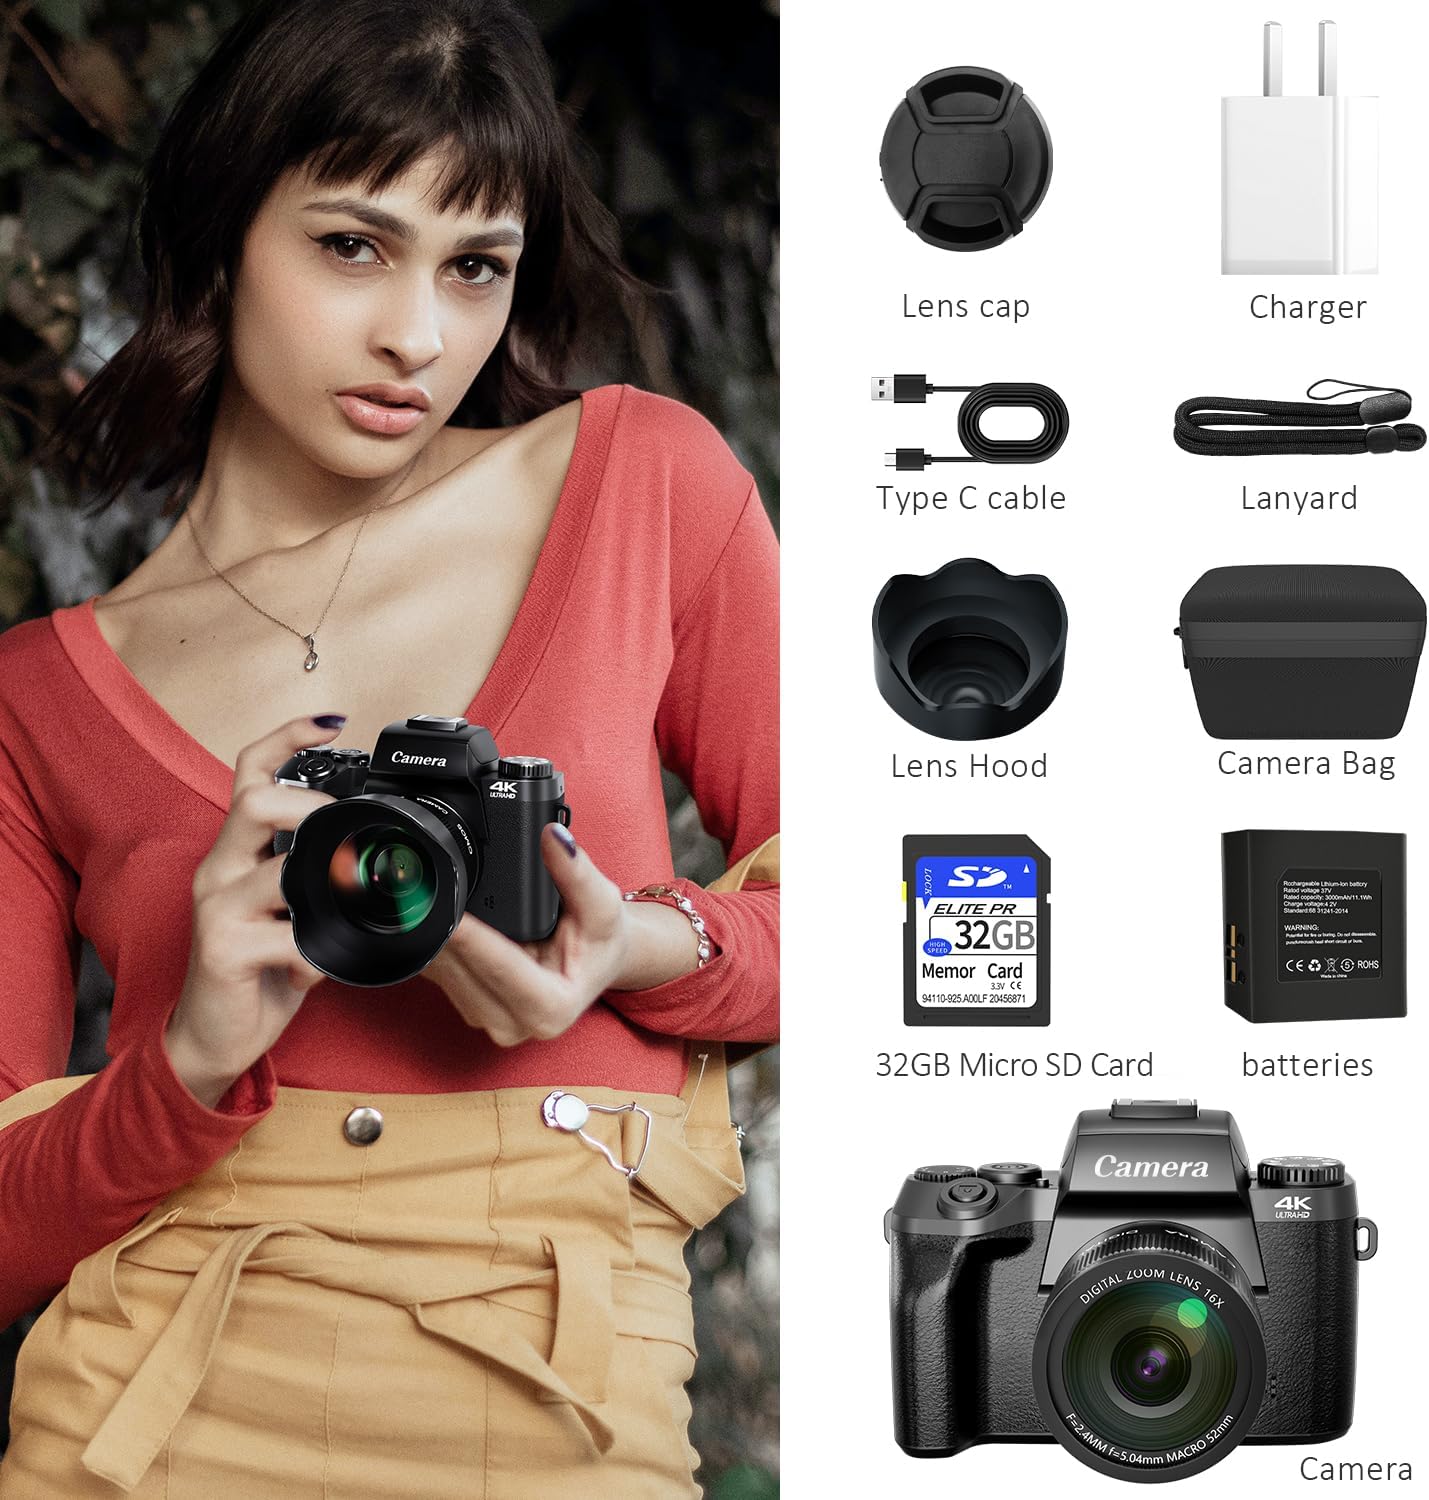 Saneen Digital Camera, 4k Cameras for Photography & Video, 64MP WiFi Touch Screen Vlogging Camera for YouTube with Flash, 32GB SD Card, Lens Hood, 3000mAH Battery, Front and Rear Cameras - Black